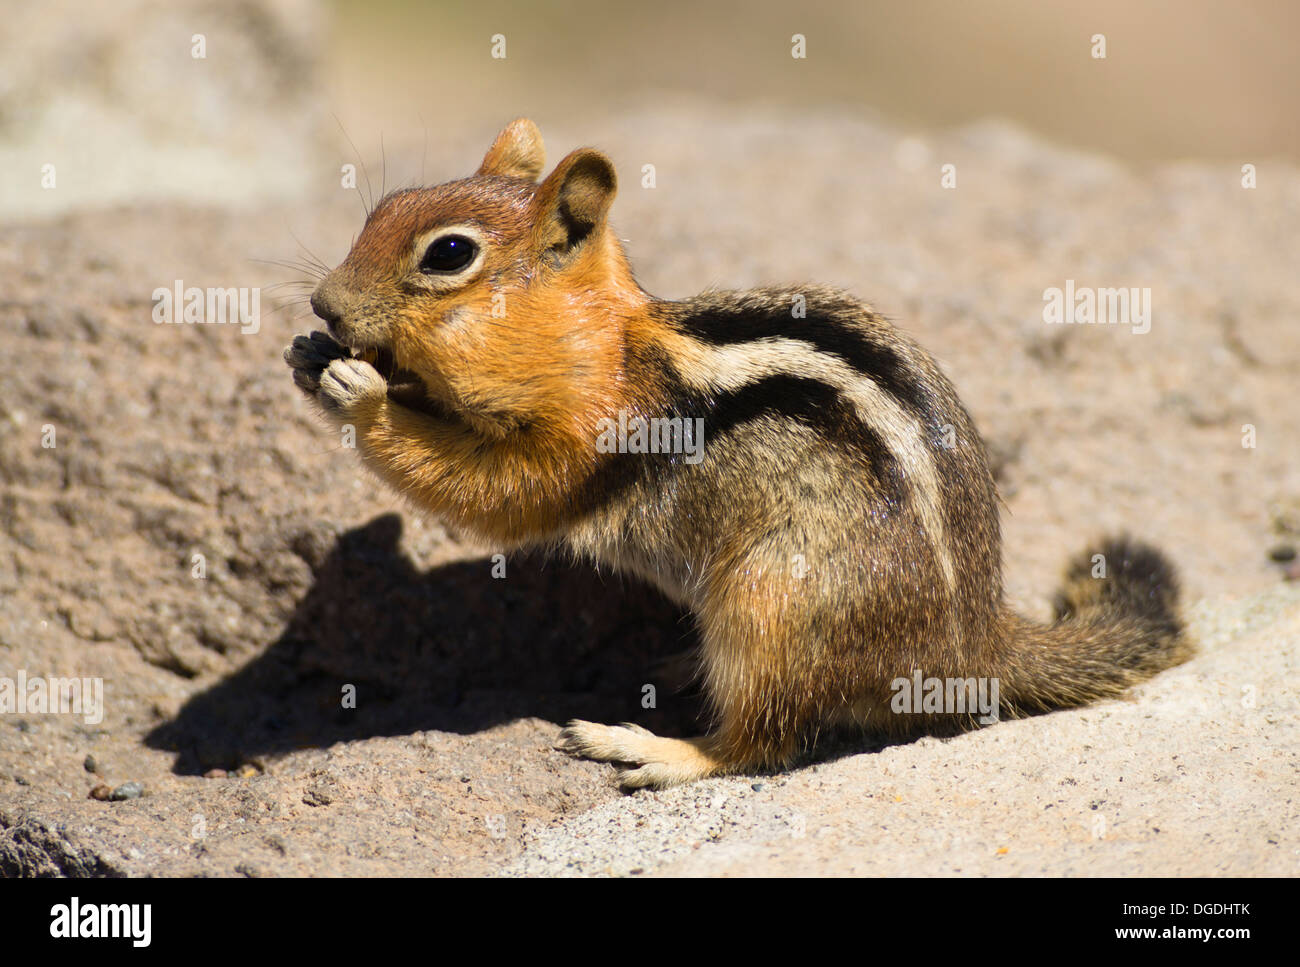 Wild Chipmunk fills his belly with food prior to hibernation Stock Photo